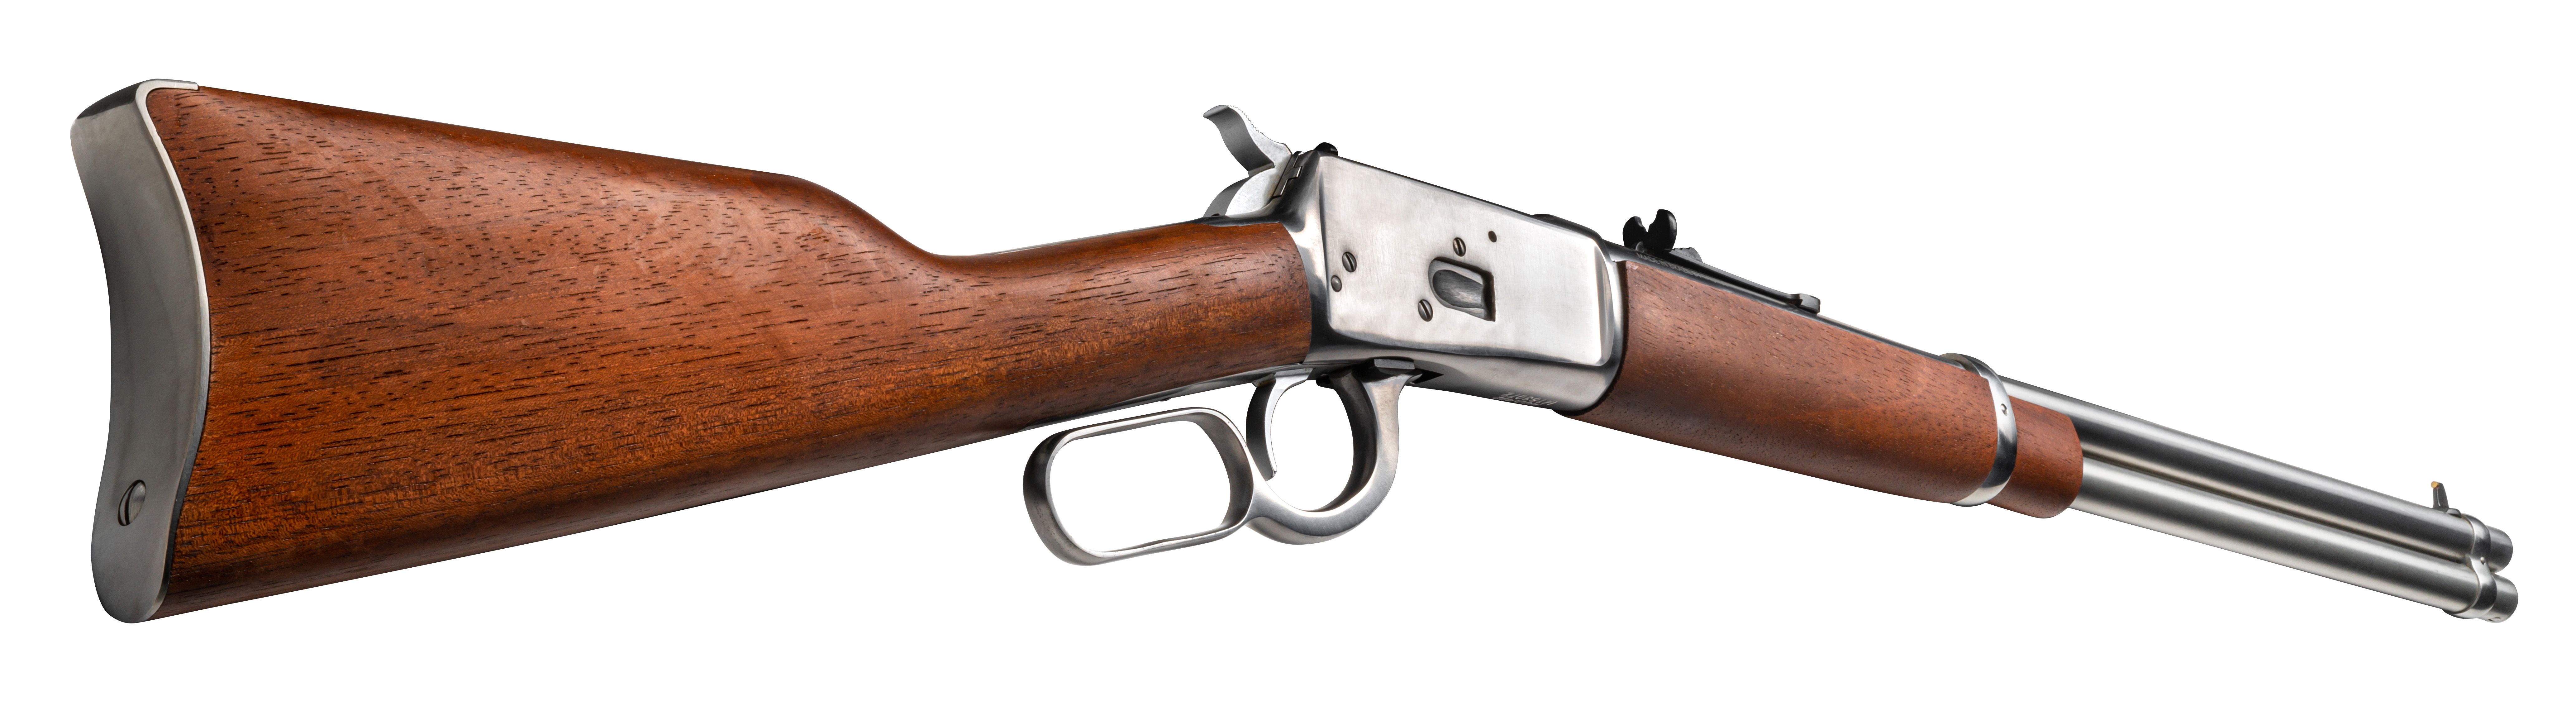 R92 Hardwood, .44 MAG, Polished Stainless, 20 In.